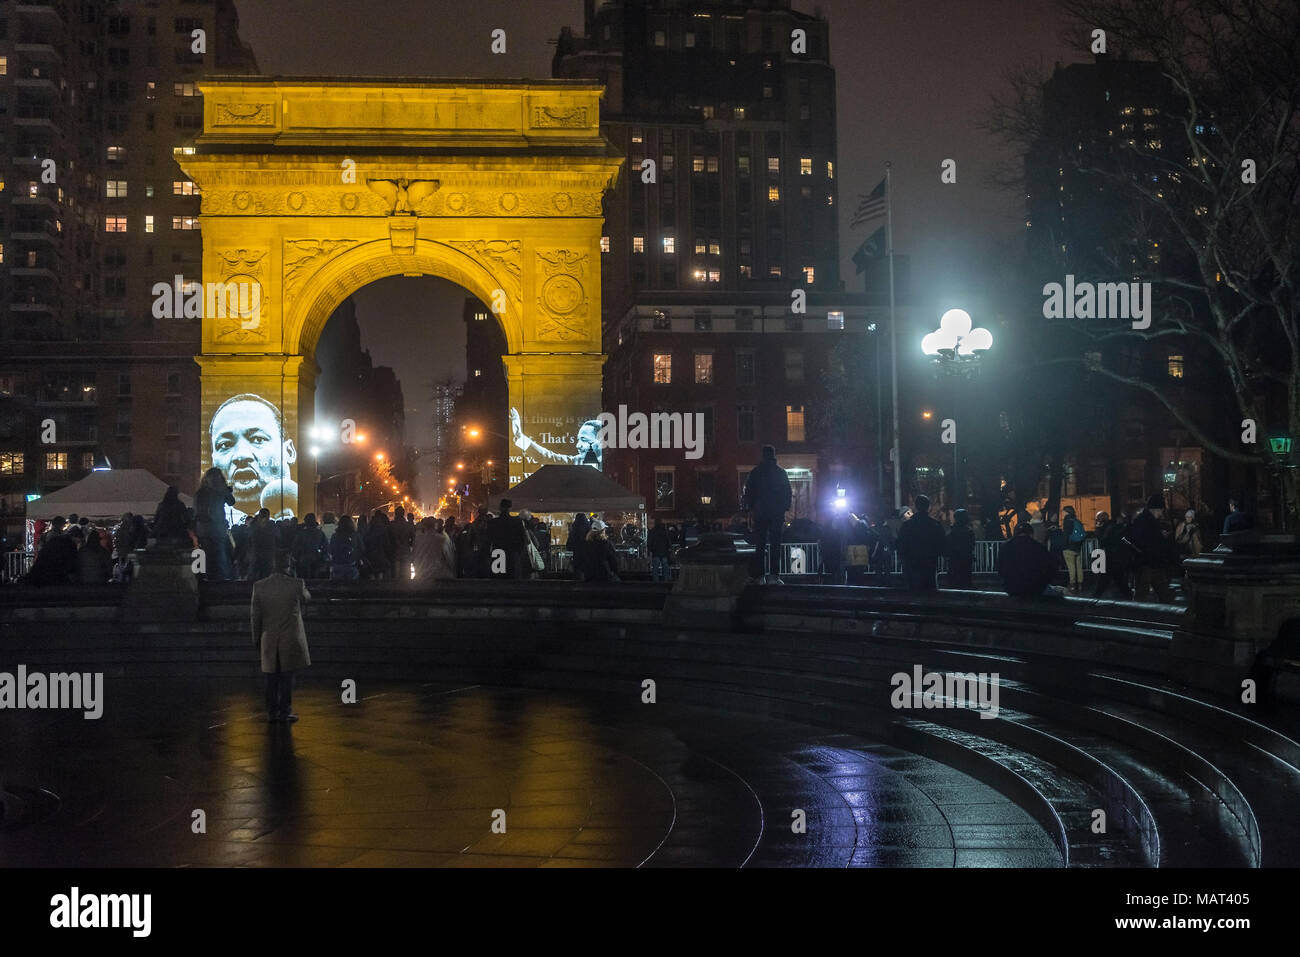 New York, NY, USA 3 April 2018 The arch in Washington Square Park was lit in orange with images of Dr. Martin Luther King projected on the south side  as a recording of King's speech  “I’ve Been to the Mountaintop” was played, to mark the 50th anniversary of its delivery on the eve of Dr King's assassination. CREDIT ©Stacy Walsh Rosenstock/Alamy Live News Stock Photo